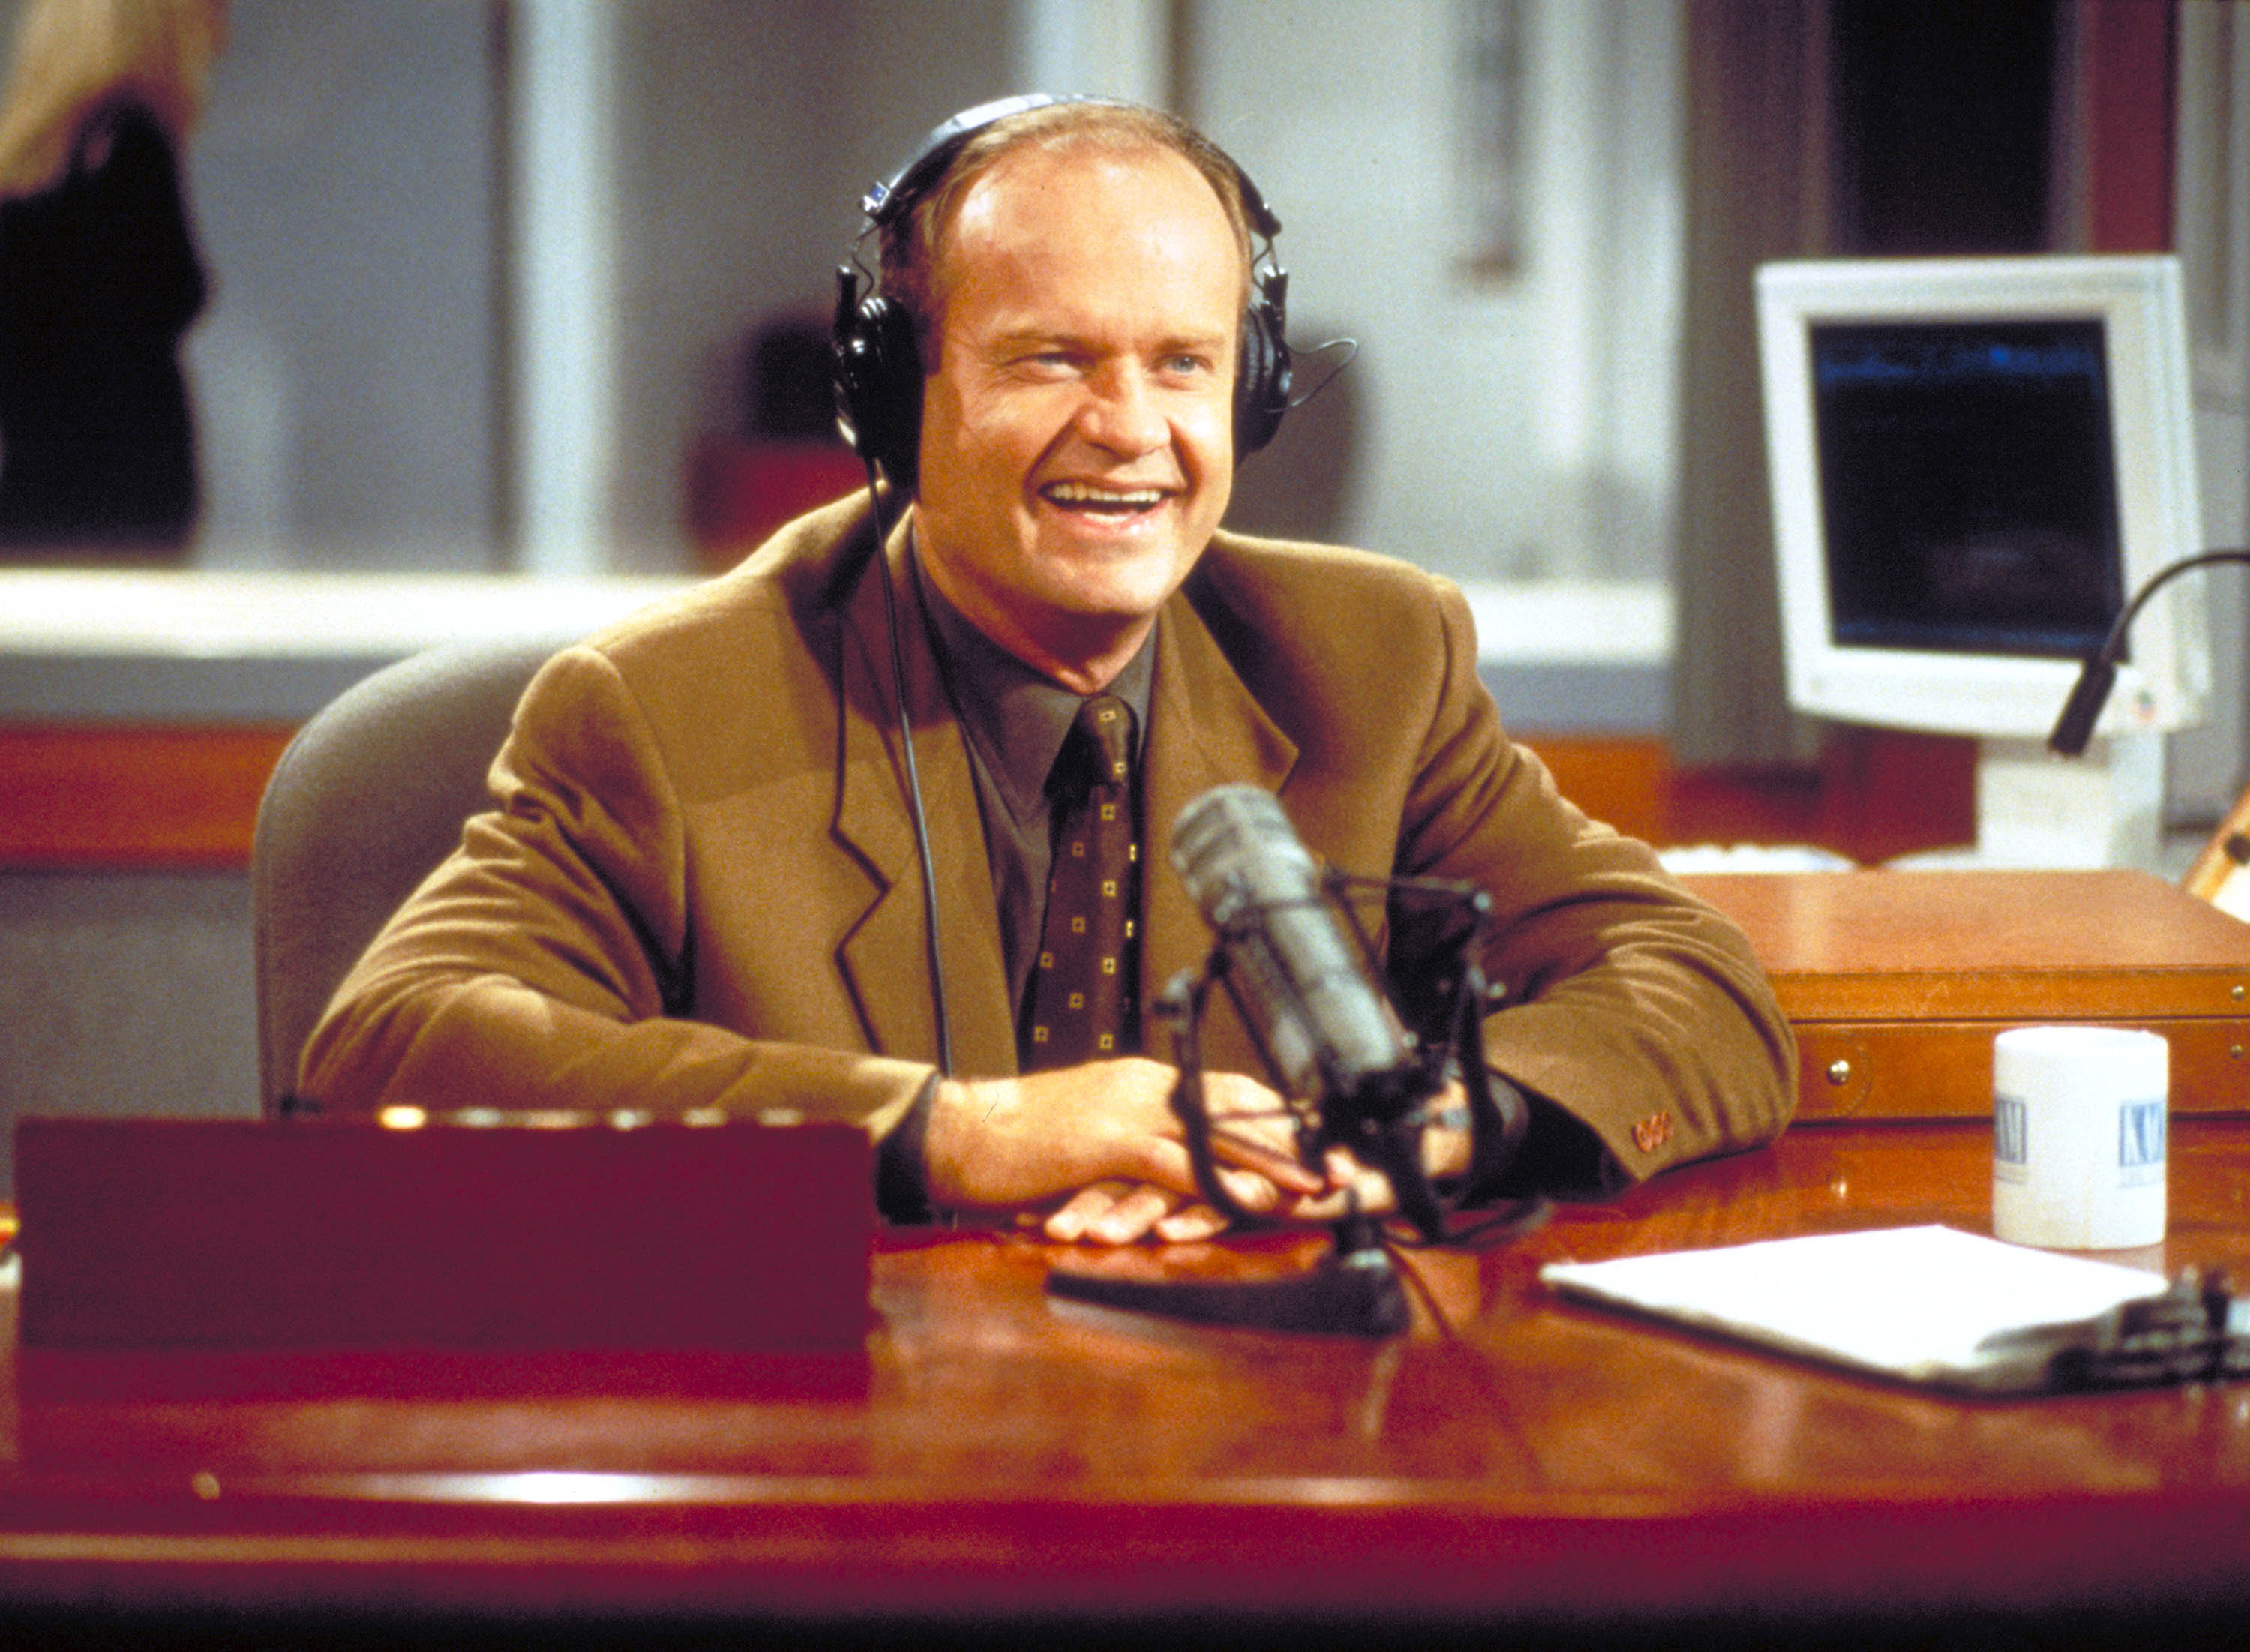 When I first watched the show, Frasier (or at least, the actor who played him, Kelsey Grammer) was – or so I assumed – about the same age as my father